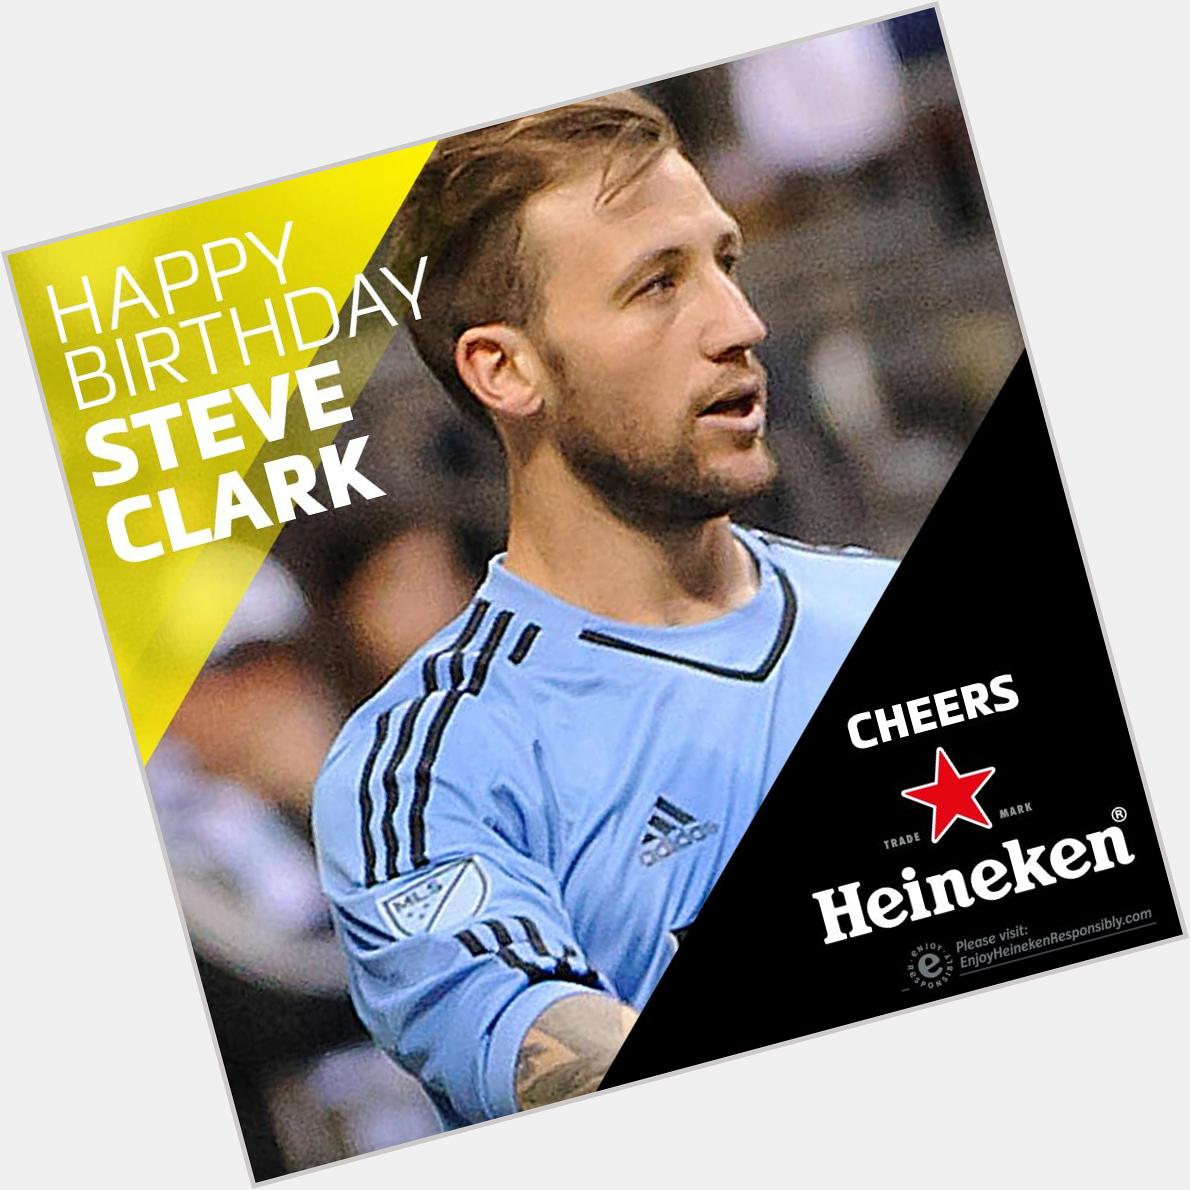 Happy birthday to our No. 1, Steve Clark! The goalkeeper recently signed a new contract with 